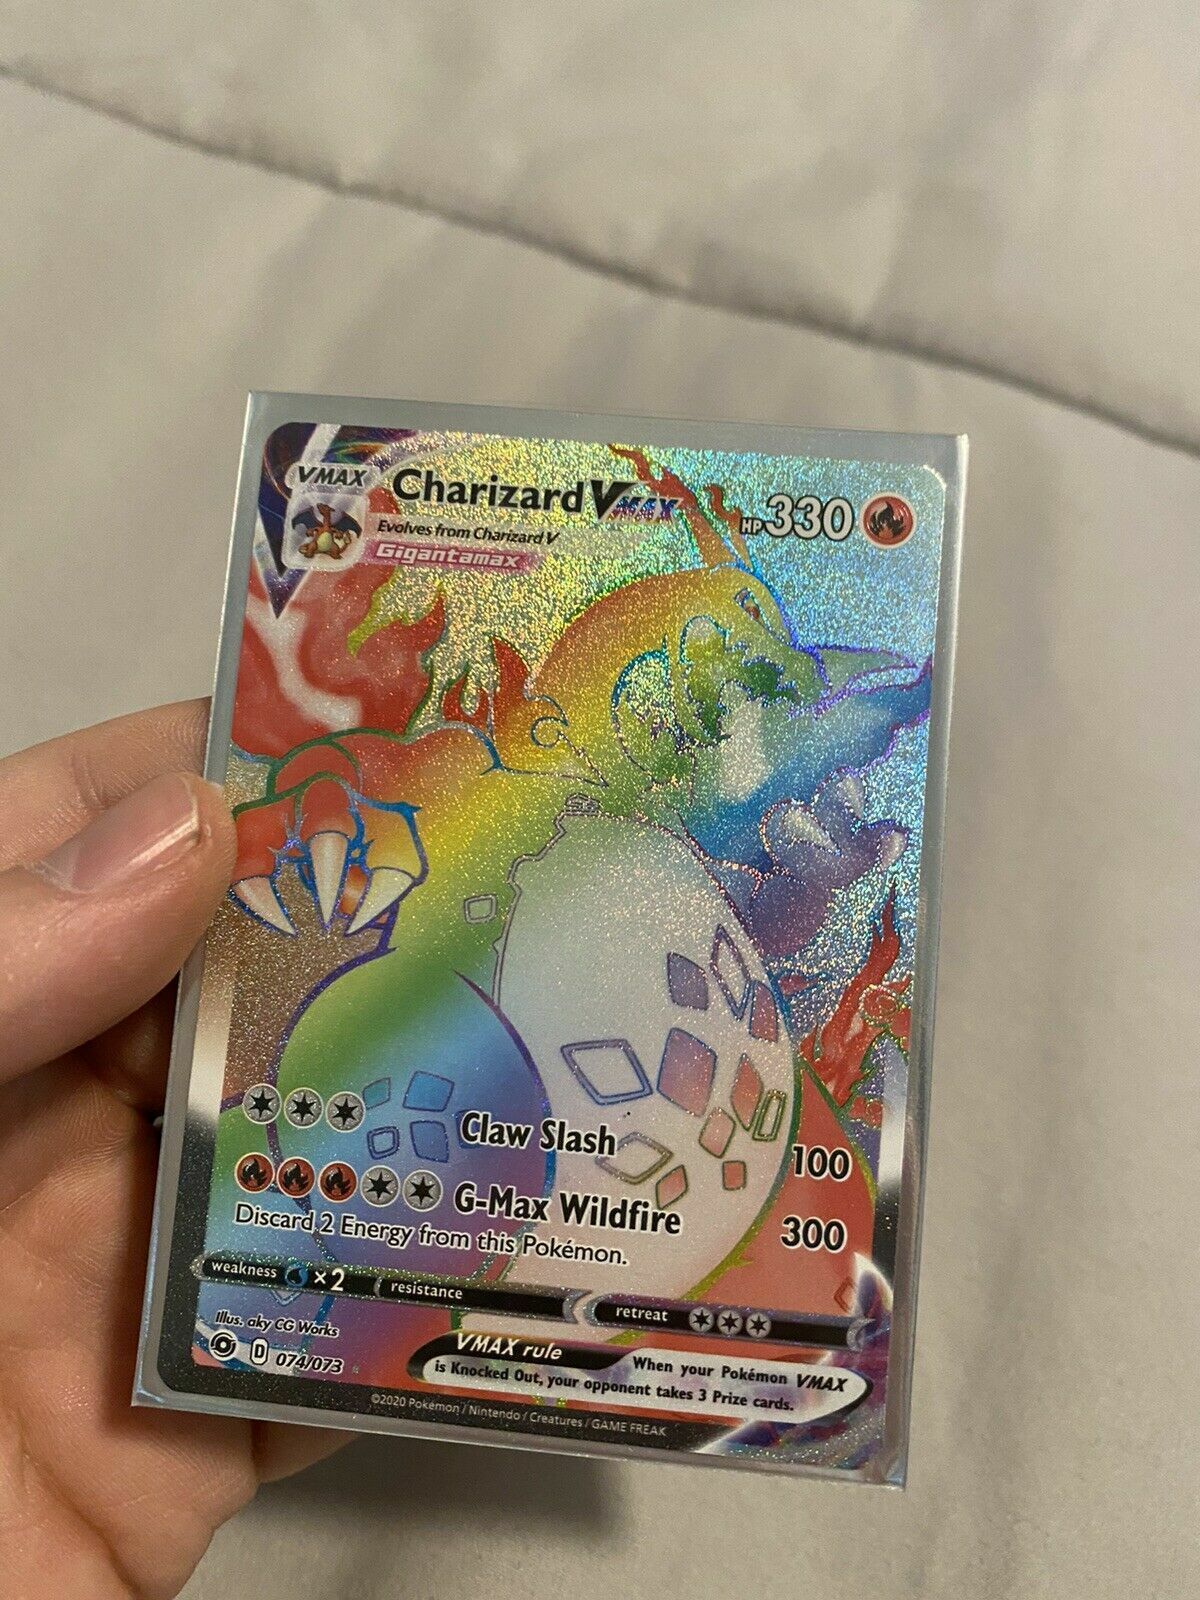 PLS READ DETAILS Repacked Booster Champions Path Rainbow Charizard Vmax & other